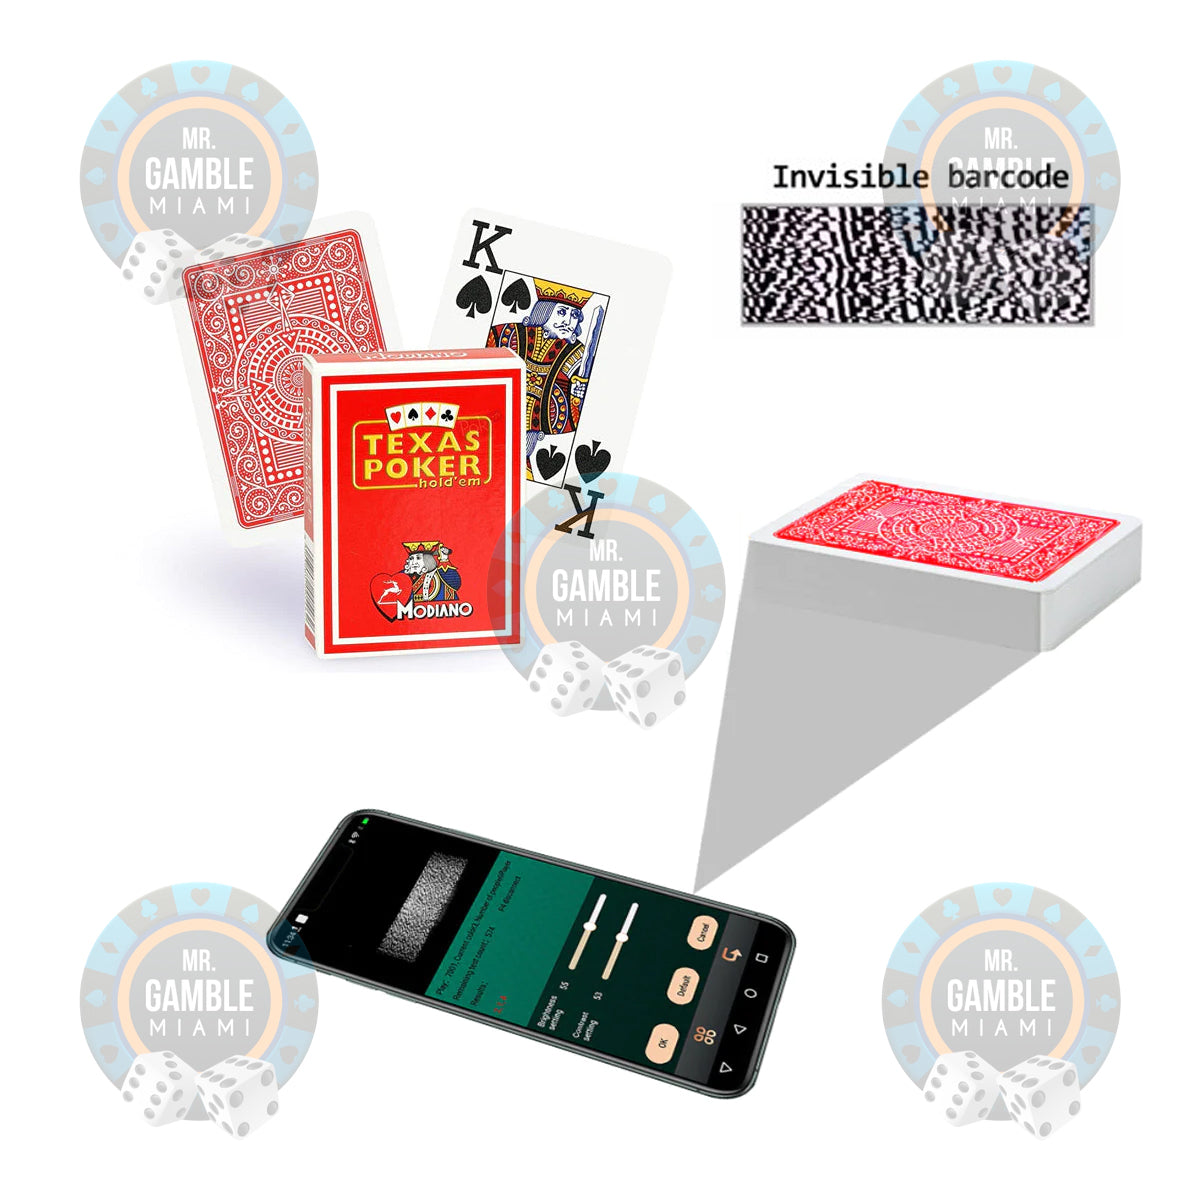 Barcode marked cards MODIANO TEXAS POKER JUMBO - Martin Kabrhel-style poker cheating device, invisible ink marking for anti-cheat poker readers